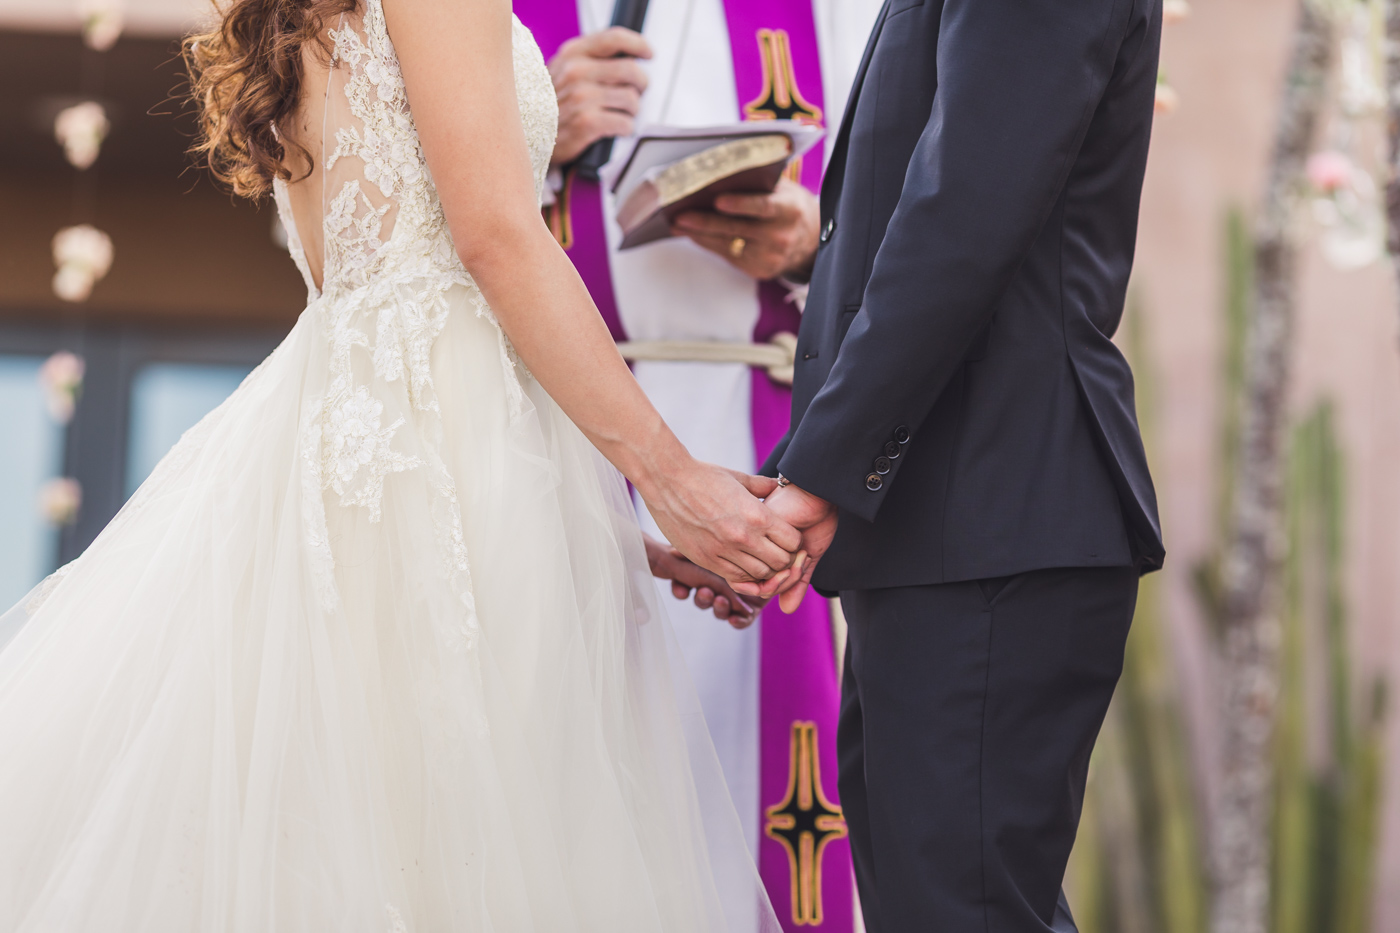 holding-hands-at-wedding-ceremony